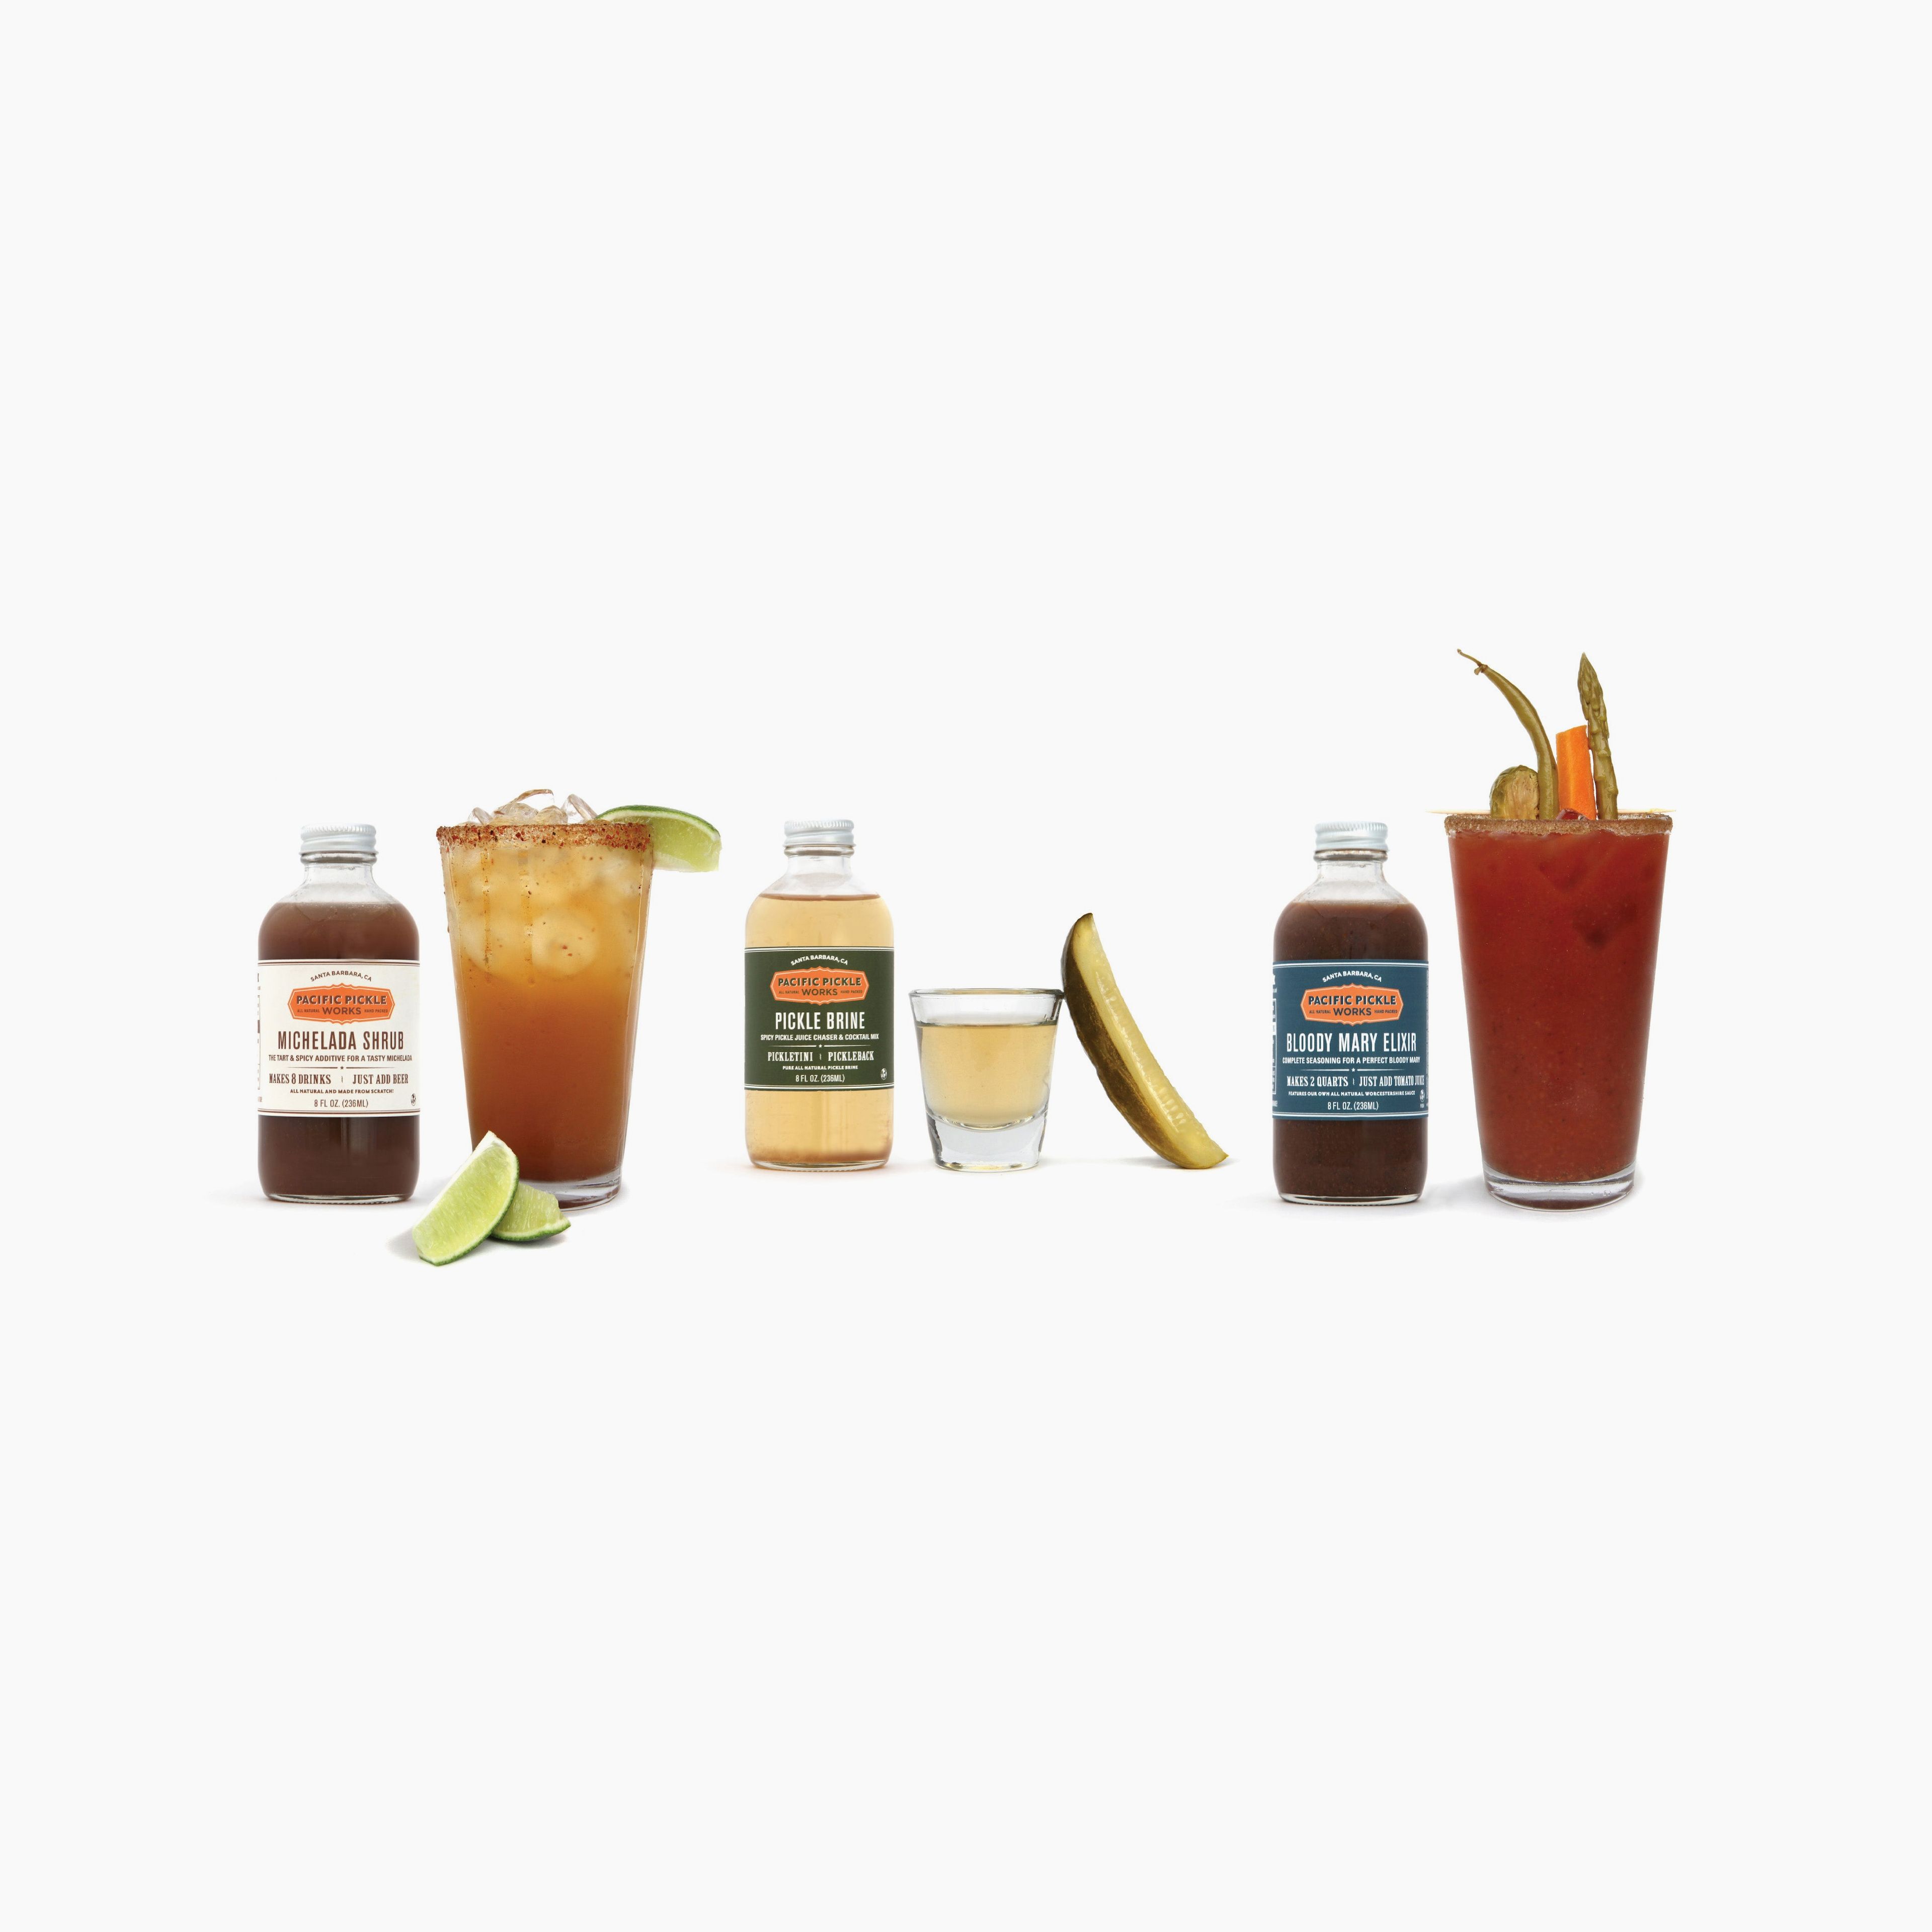 Mixed Case of Savory Cocktail Mixers, 6-pack of 16oz bottles - Bloody Mary Elixir, Michelada Shrub and Pickle Brine